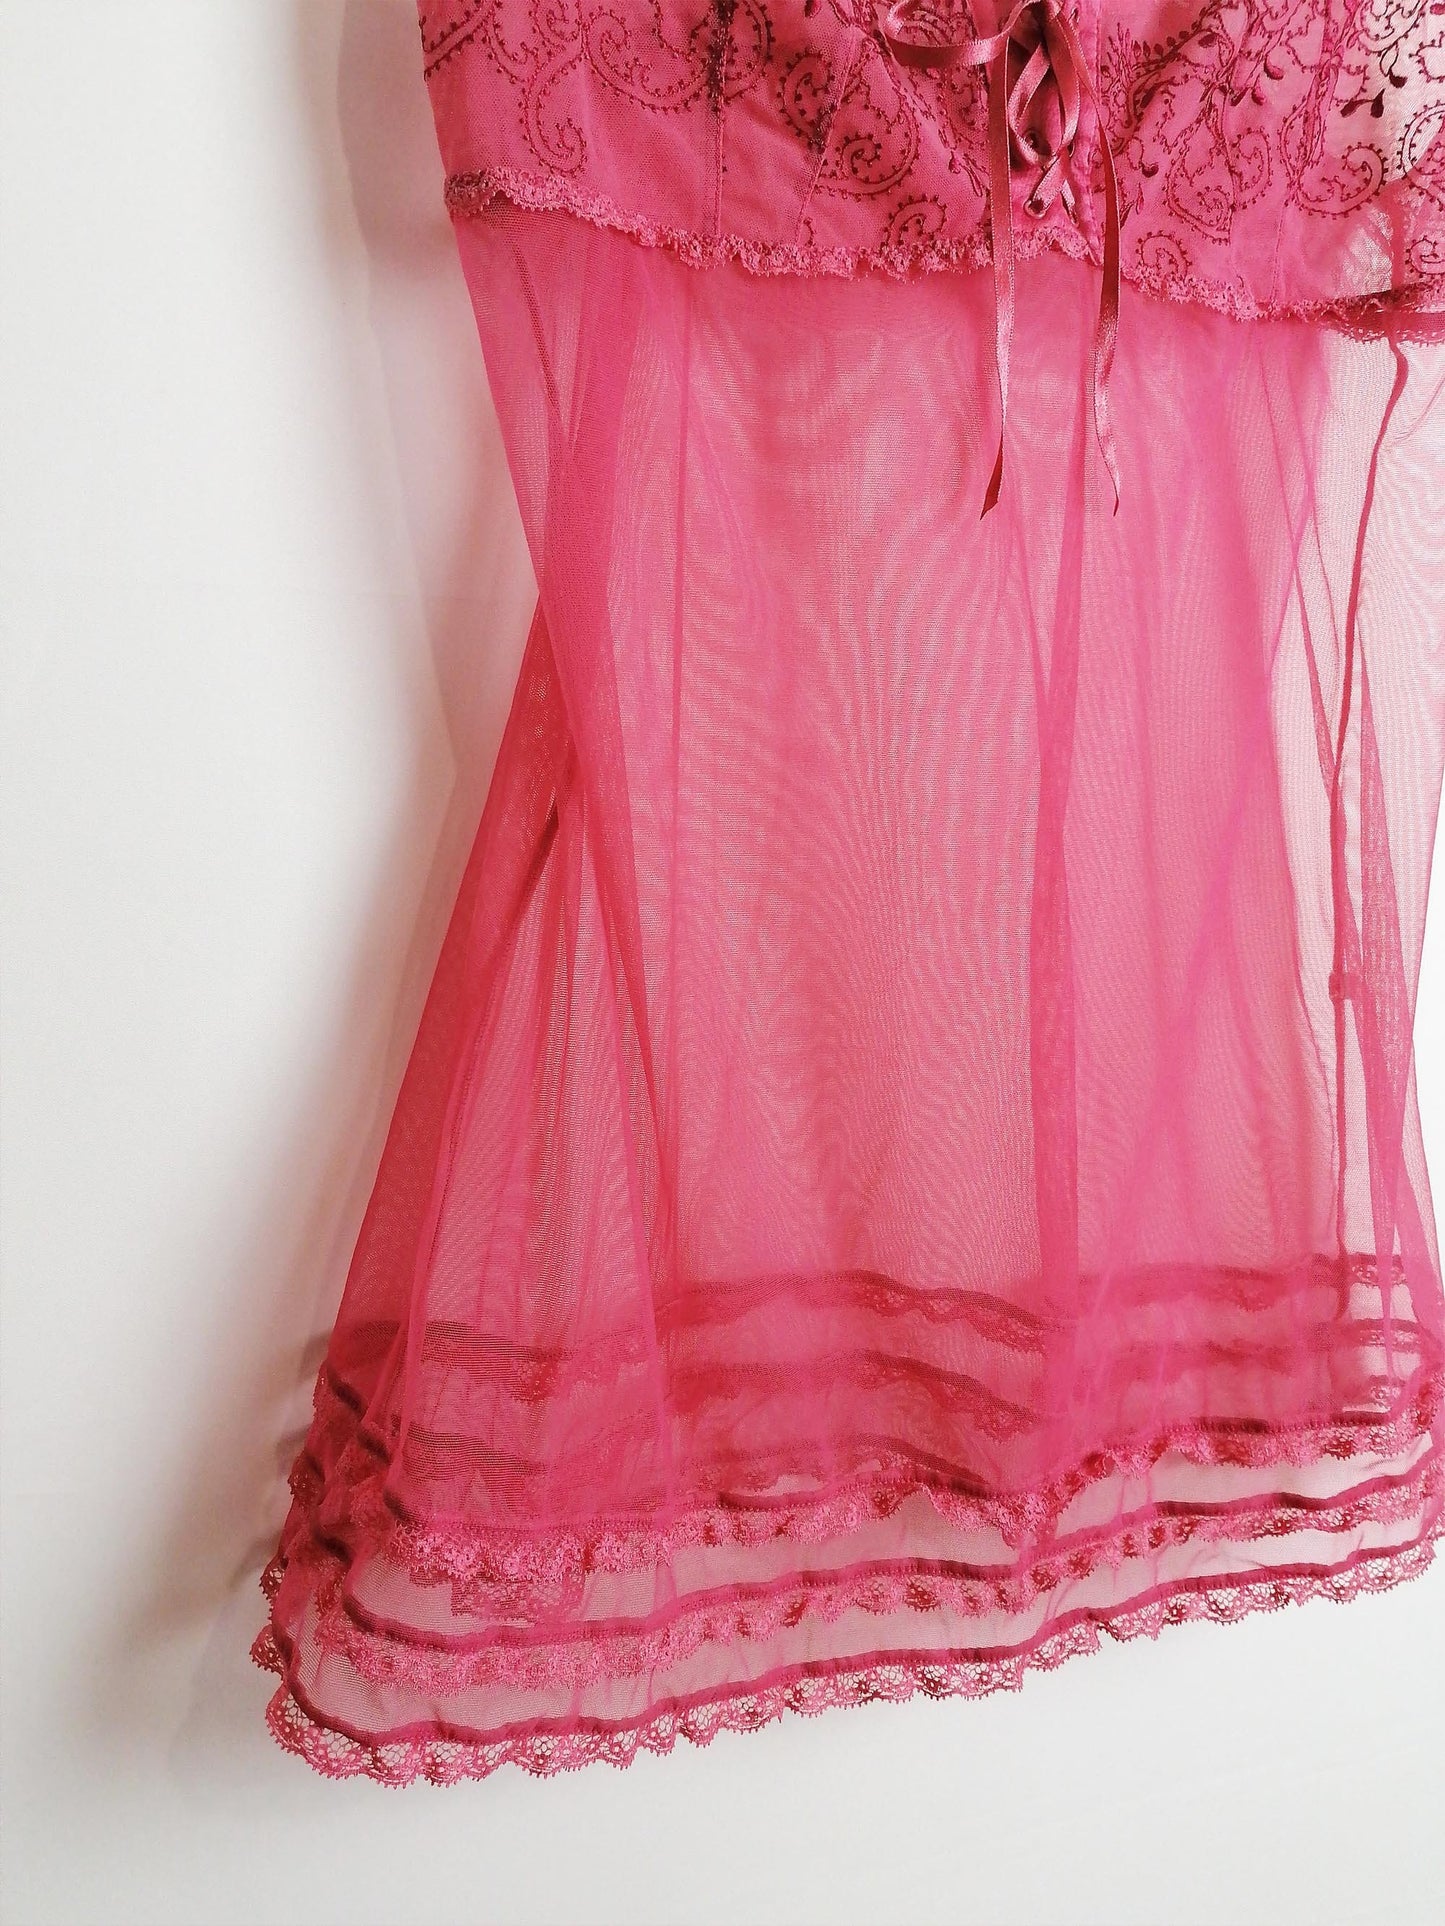 Sheer Pink Babydoll Cami Tulle - size L